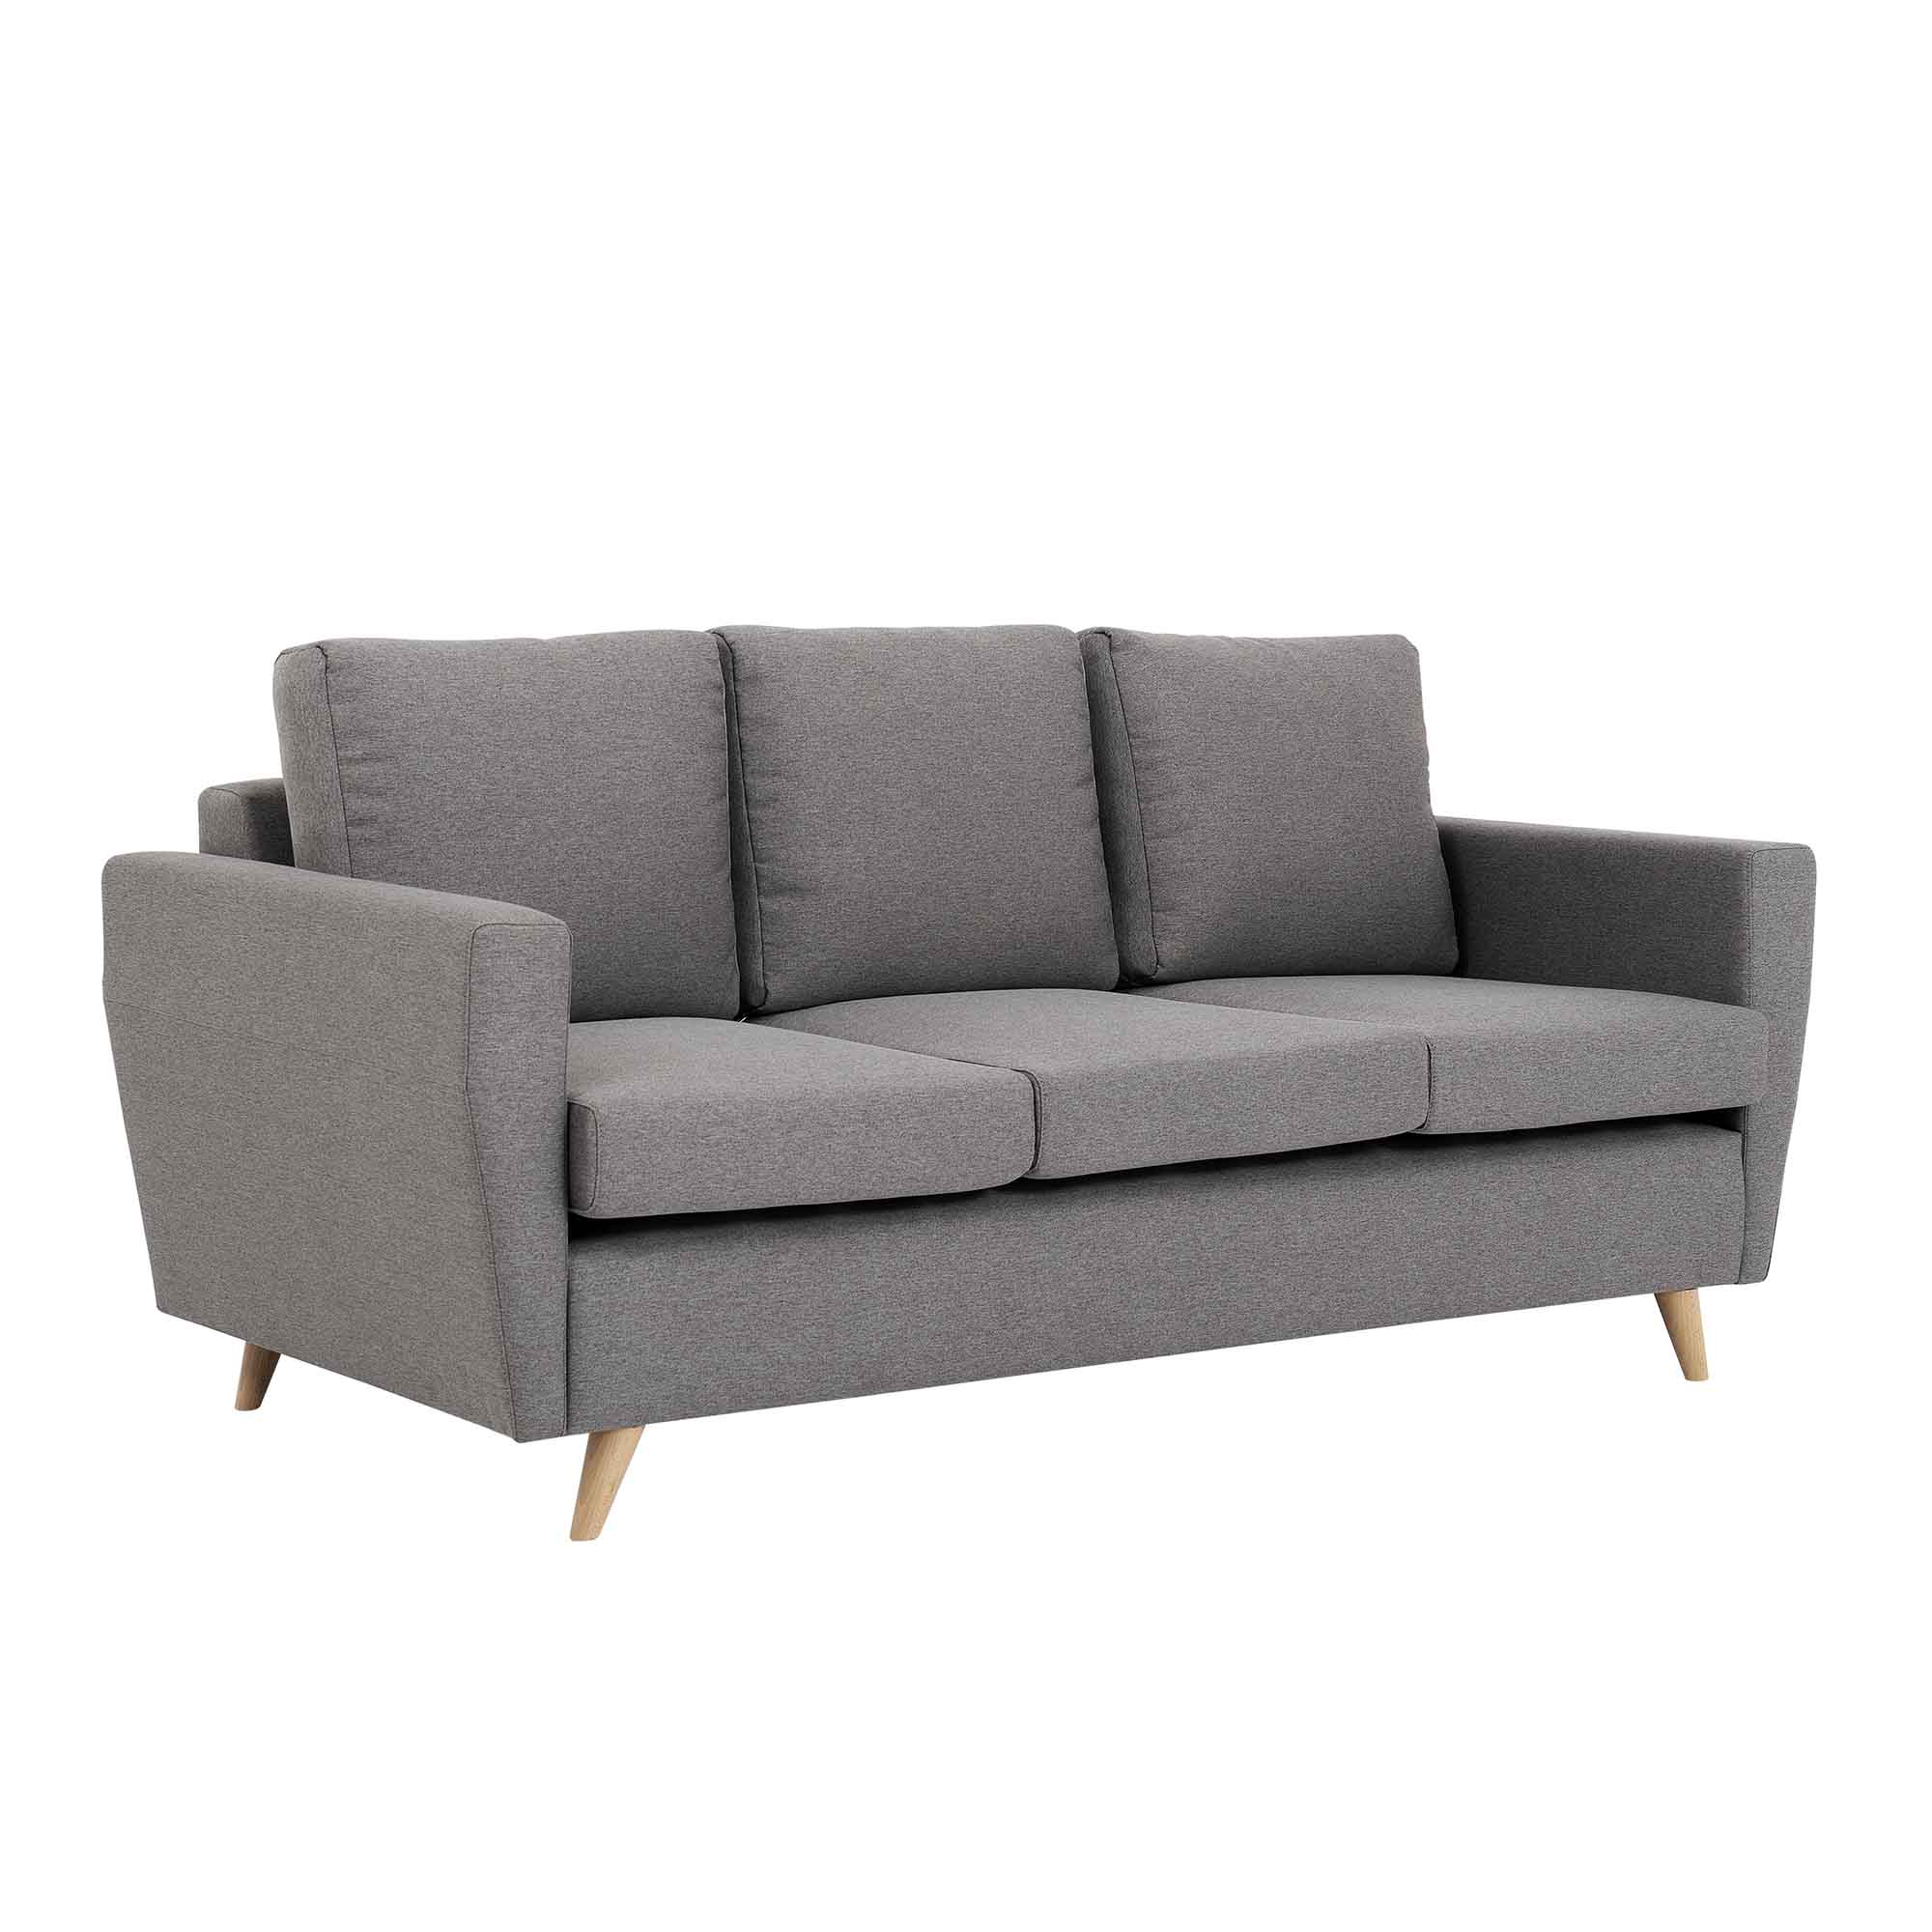 LOVER Sofa 3 Seater upholstery colour-steel grey